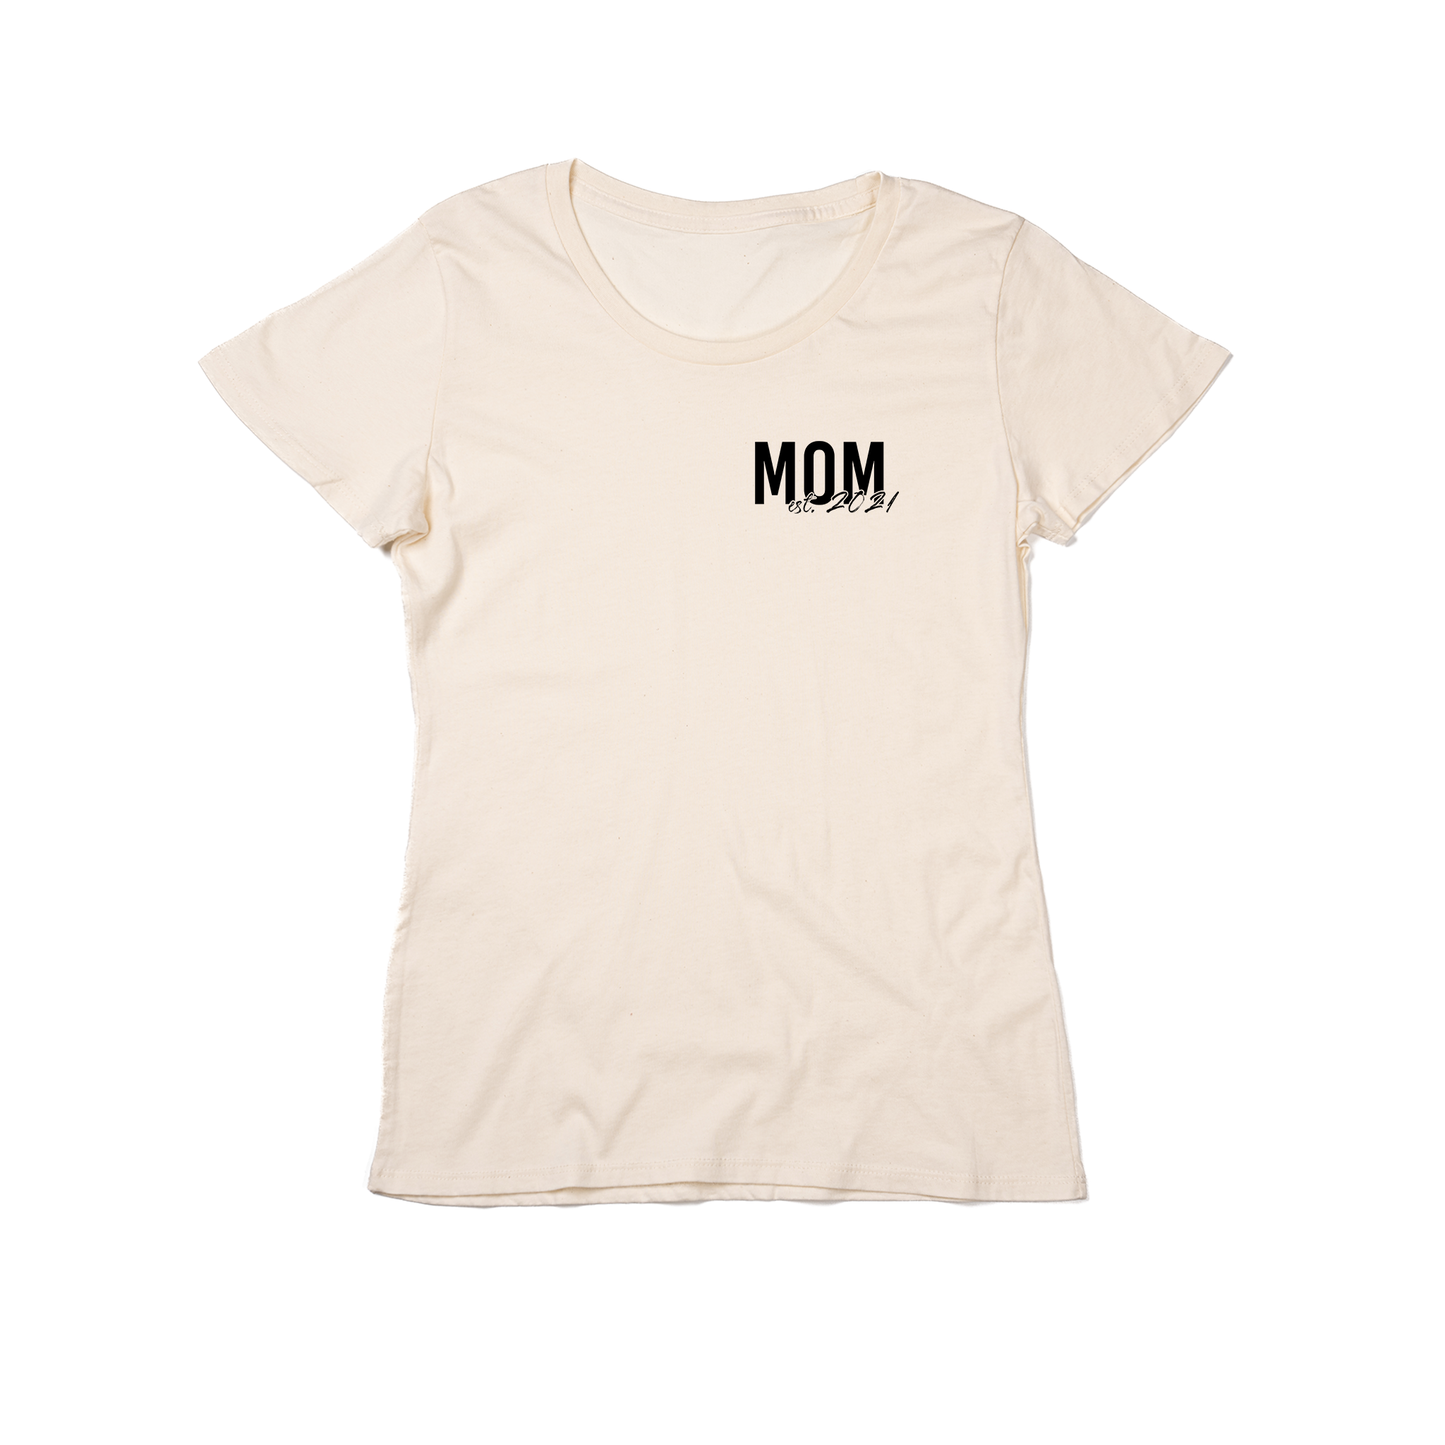 Mom EST. (Custom Year, Black) - Women's Fitted Tee (Natural)